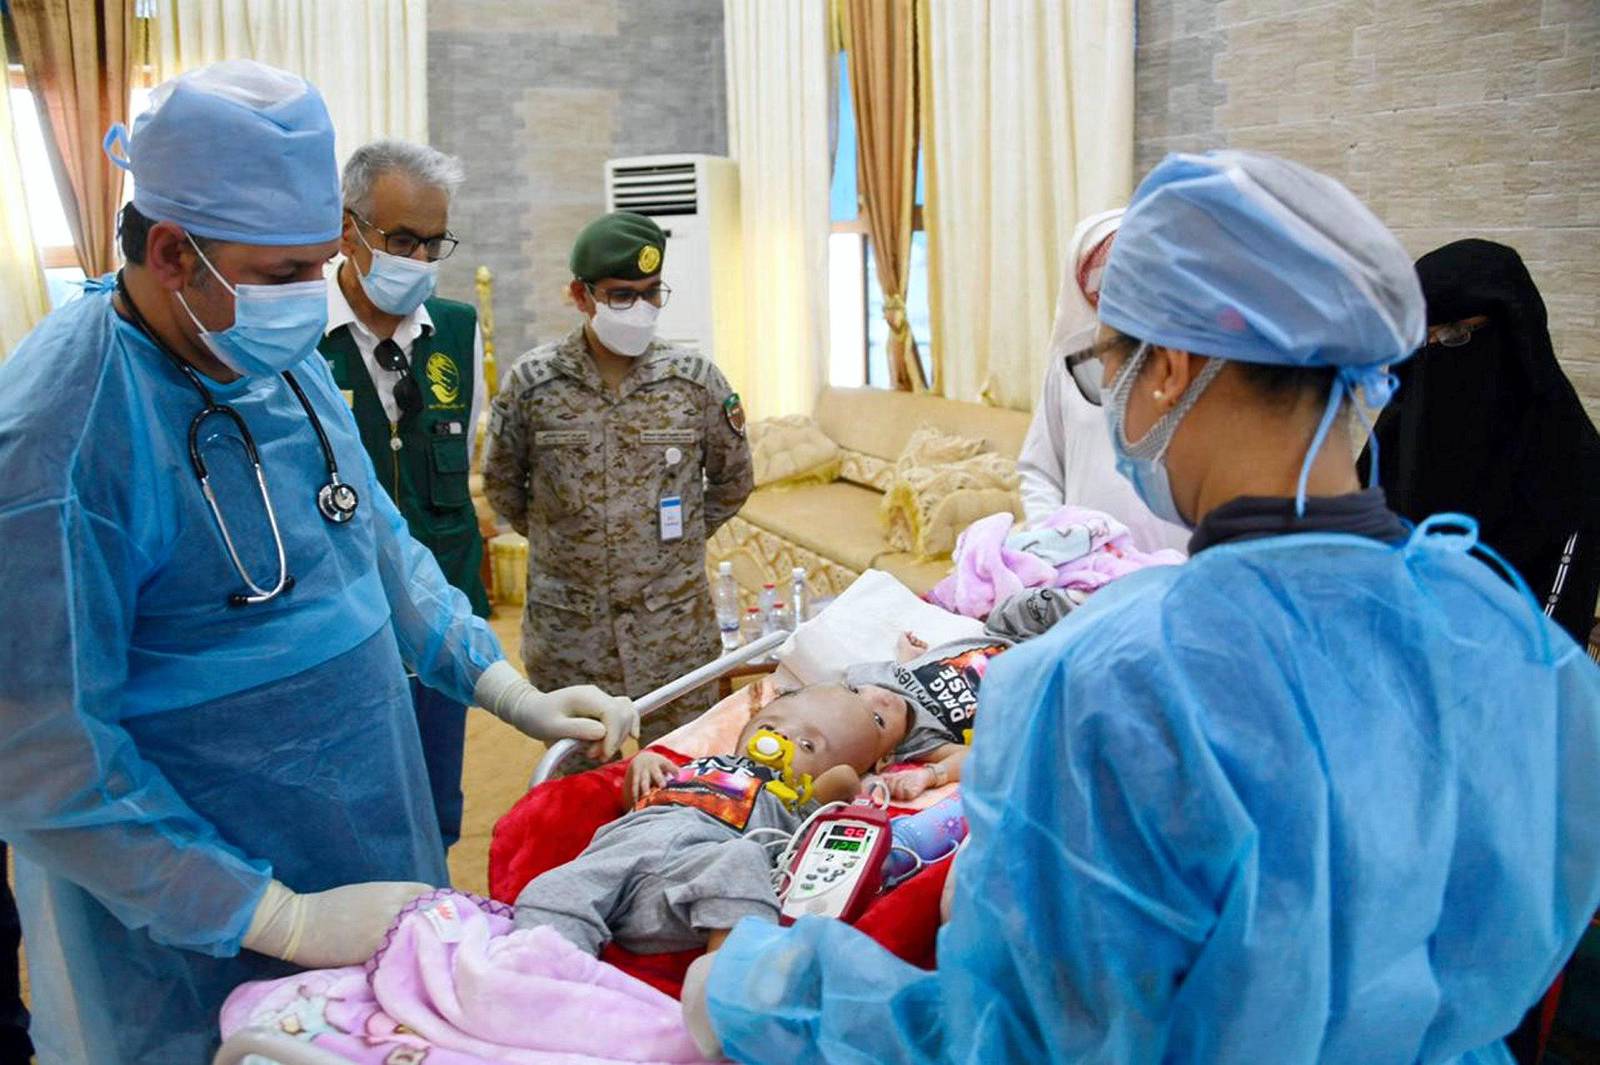 Saudi Arabia Flies In Conjoined Twins For Possible Separation Surgery